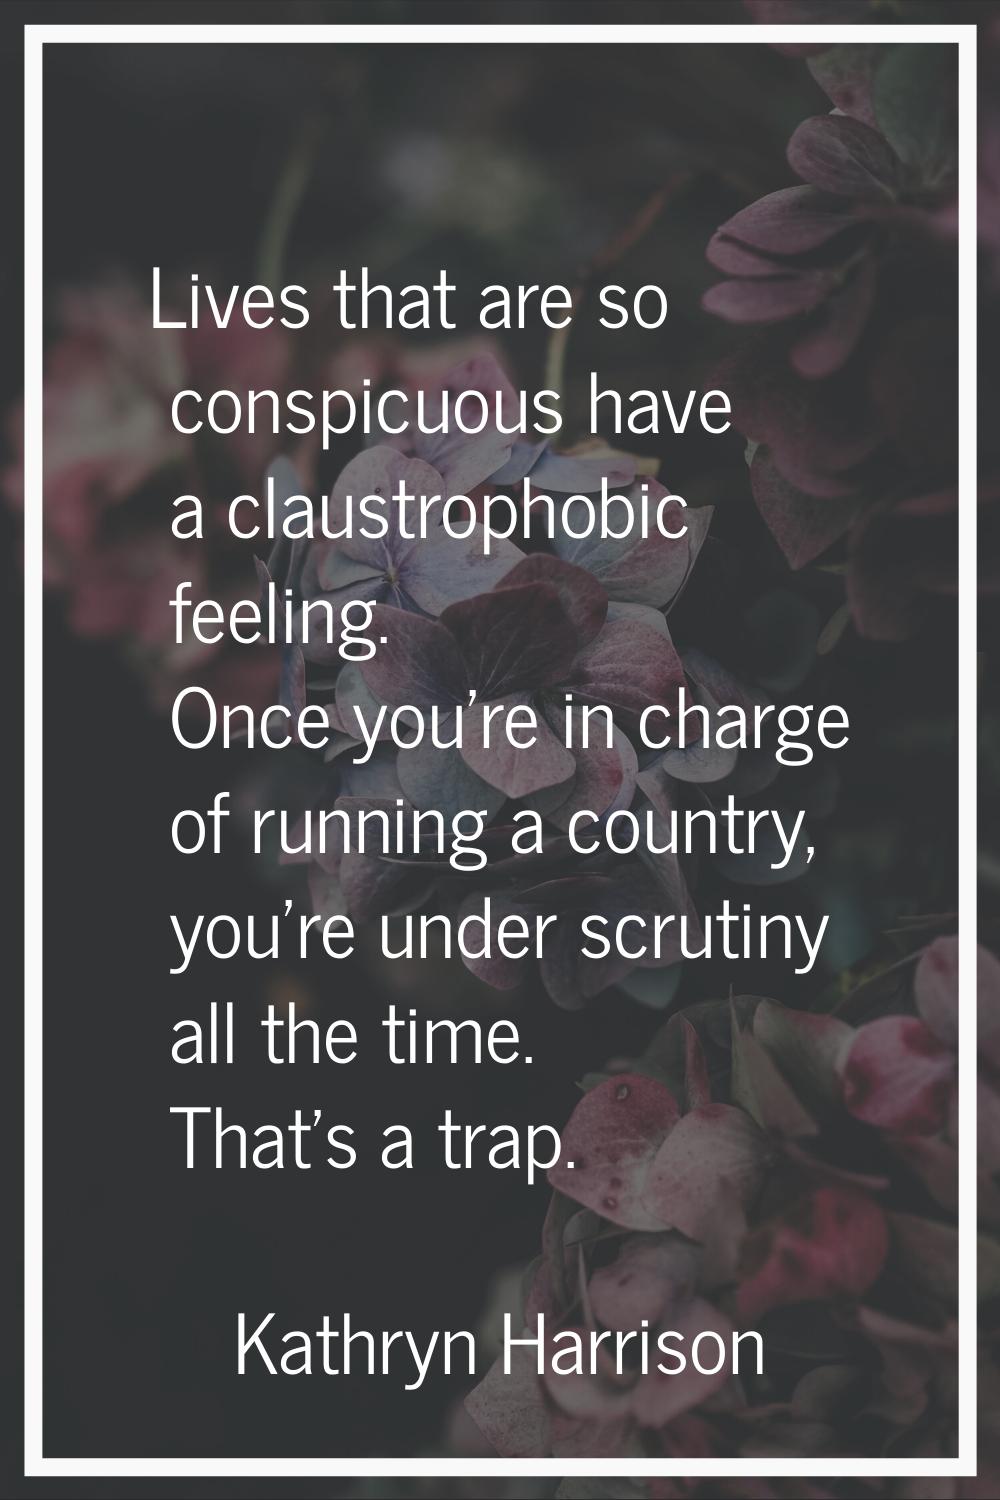 Lives that are so conspicuous have a claustrophobic feeling. Once you're in charge of running a cou